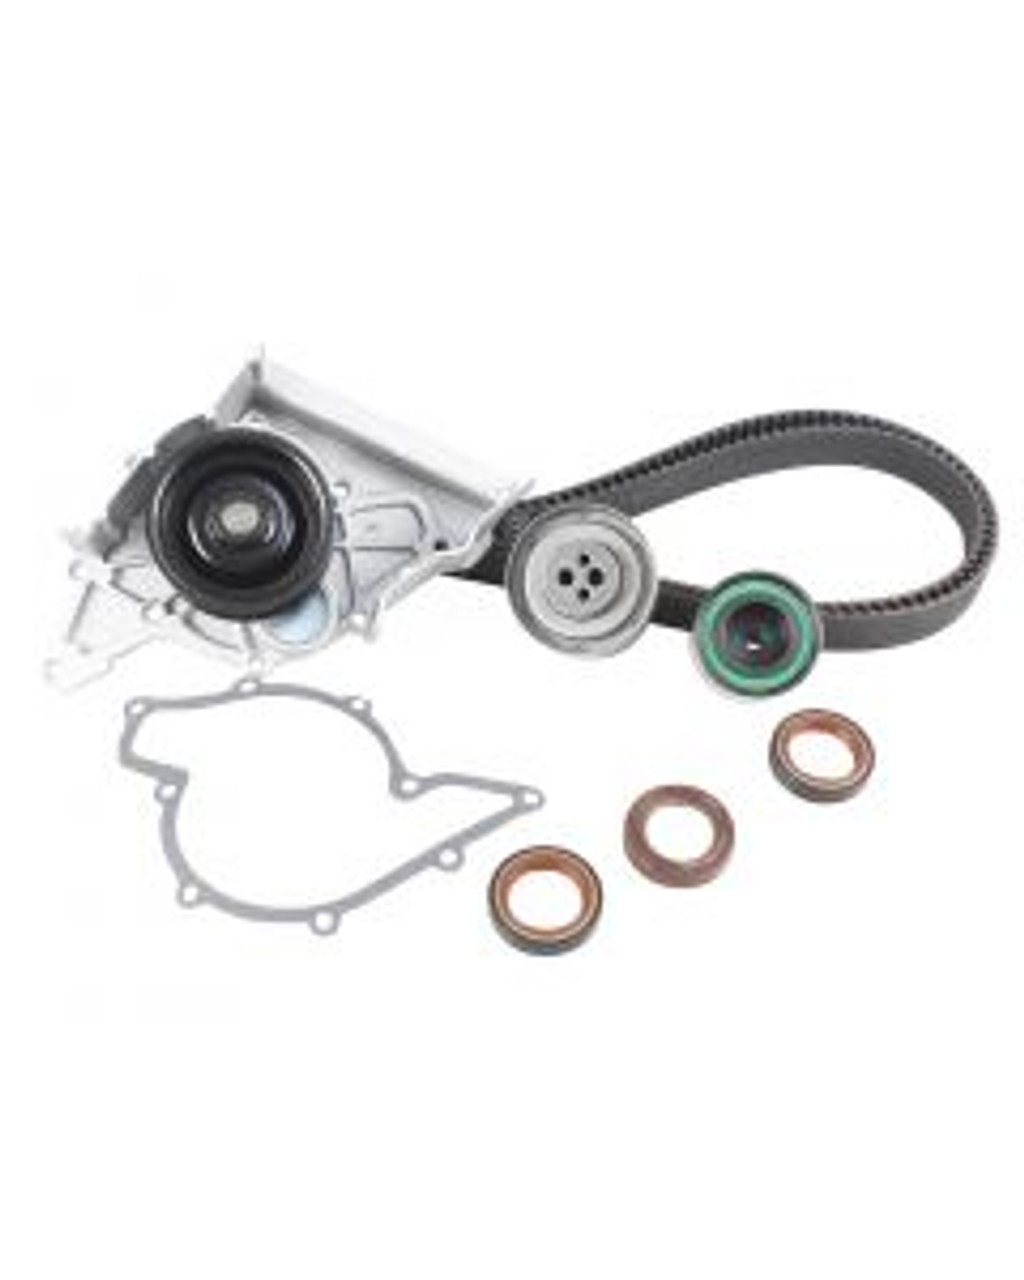 Timing Belt Kit with Water Pump 2.8L 1997 Audi Cabriolet - TBK806WP.16